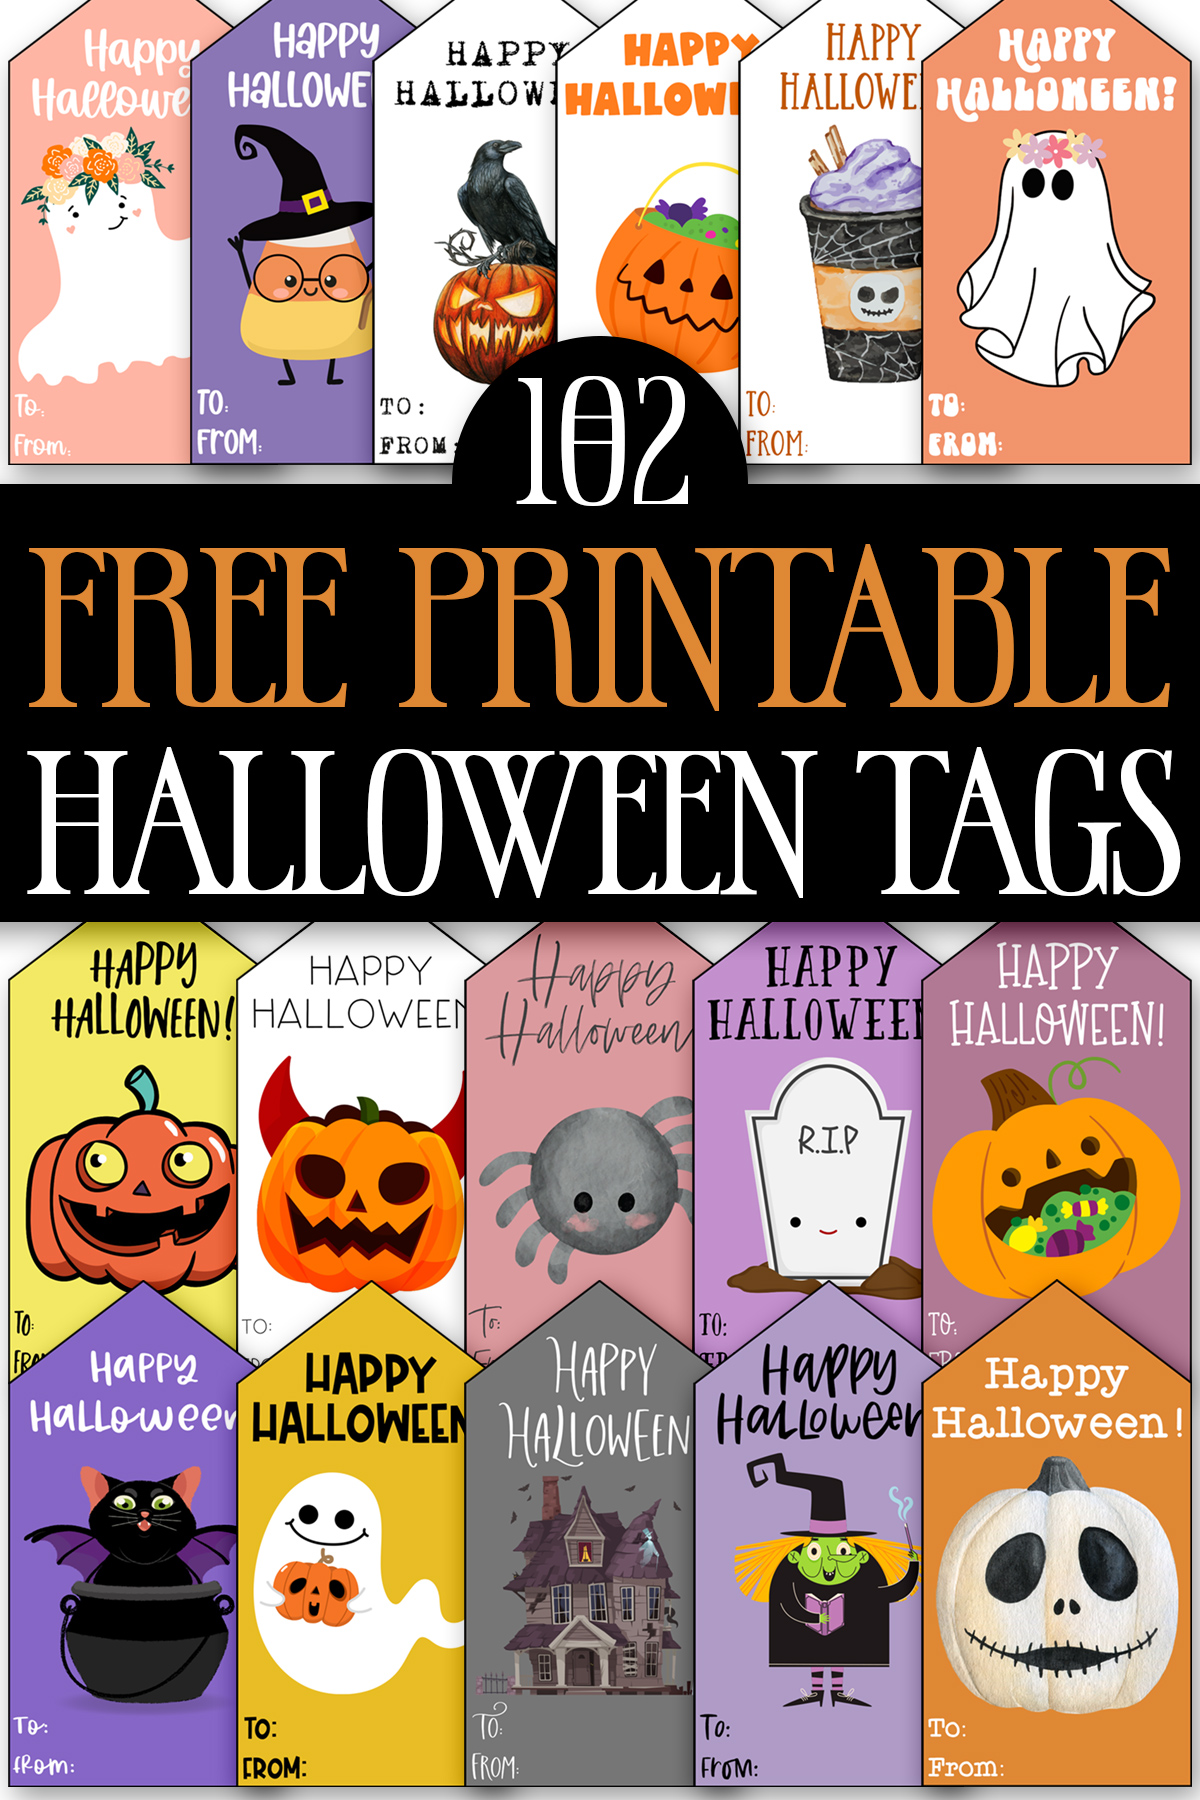 At the top the image says 102 free printable Halloween gift tags. Above and below that are some of the free Halloween gift tags you can download in this post.